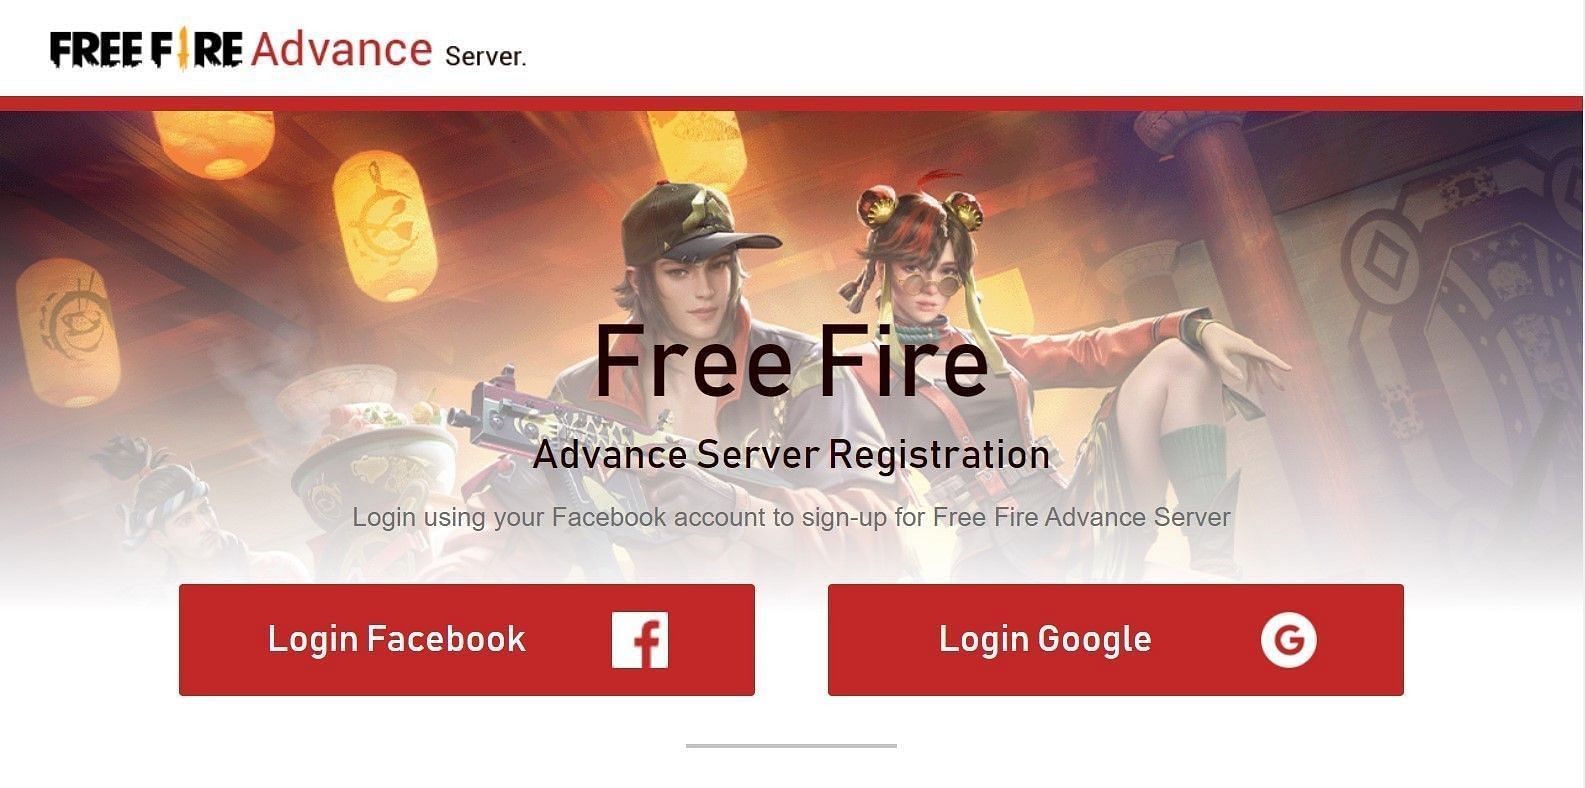 Usually two login options are available (Image via Garena)